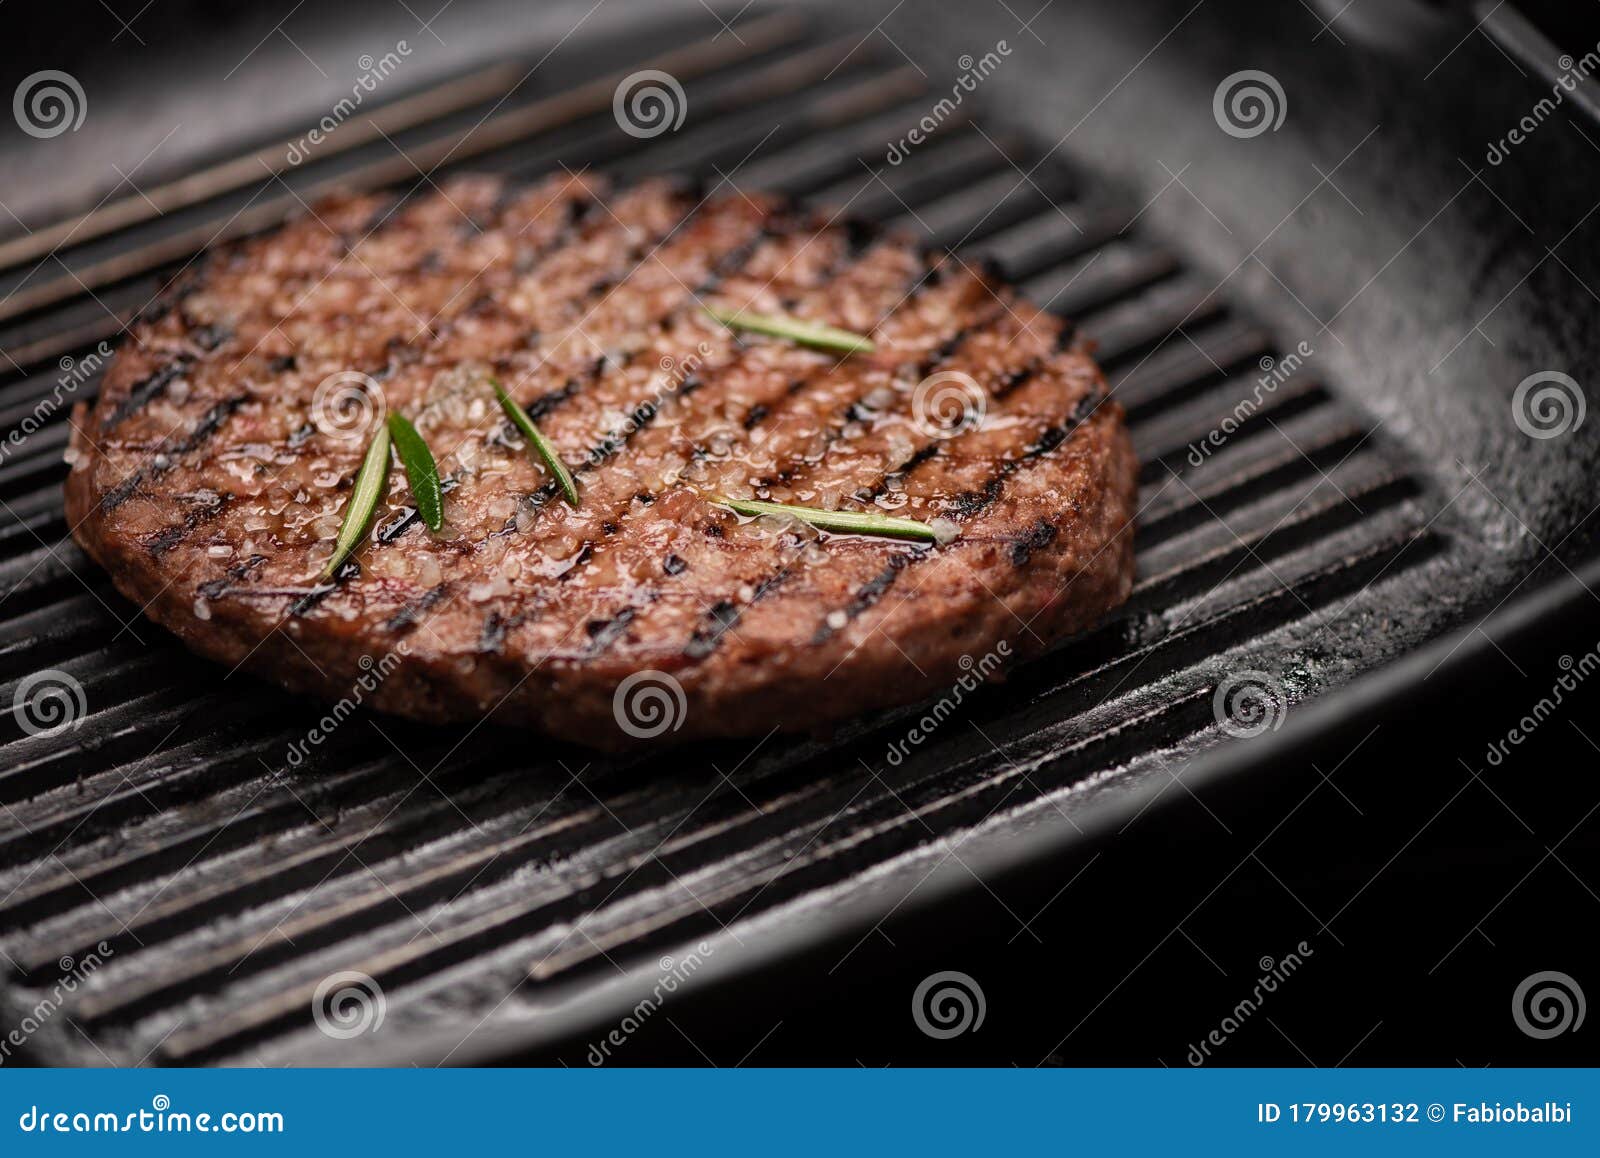 A Beef Burger Grill Cooking Stock Photo - Image of meal, dinner: 179963132